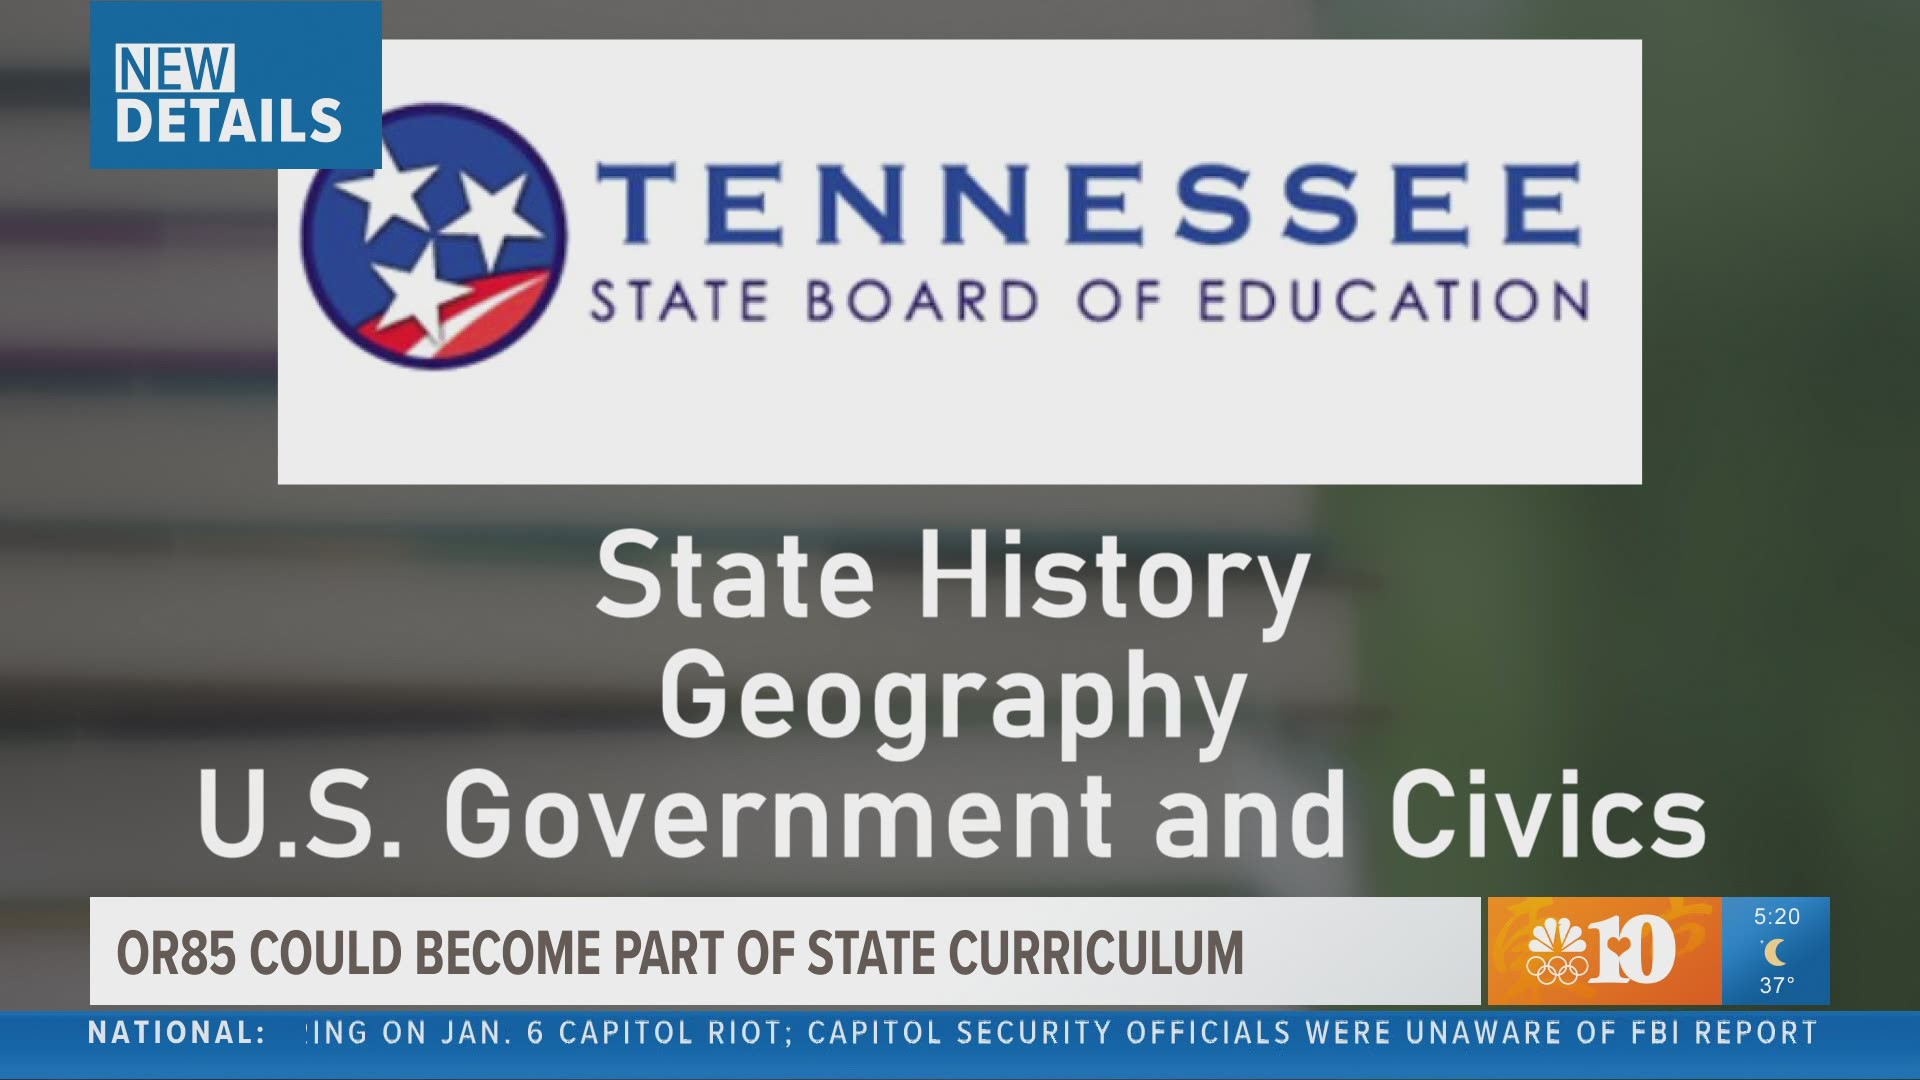 After a new course launches at the end of the year, leaders have plans to petition the state school board to amend state standards to include the Oak Ridge 85.